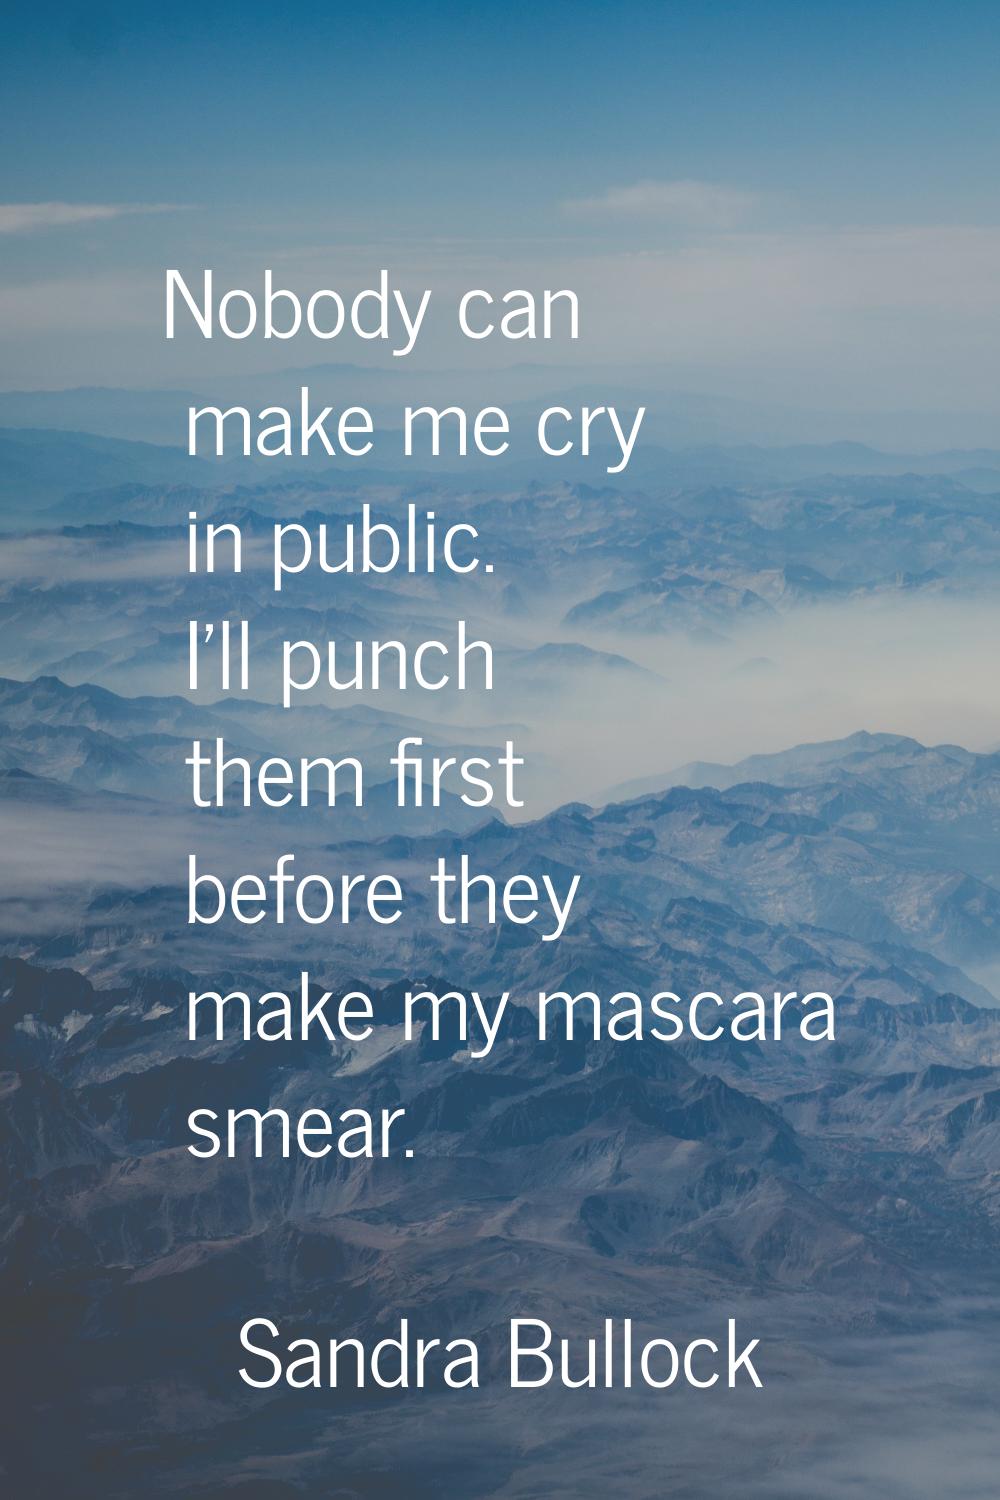 Nobody can make me cry in public. I'll punch them first before they make my mascara smear.